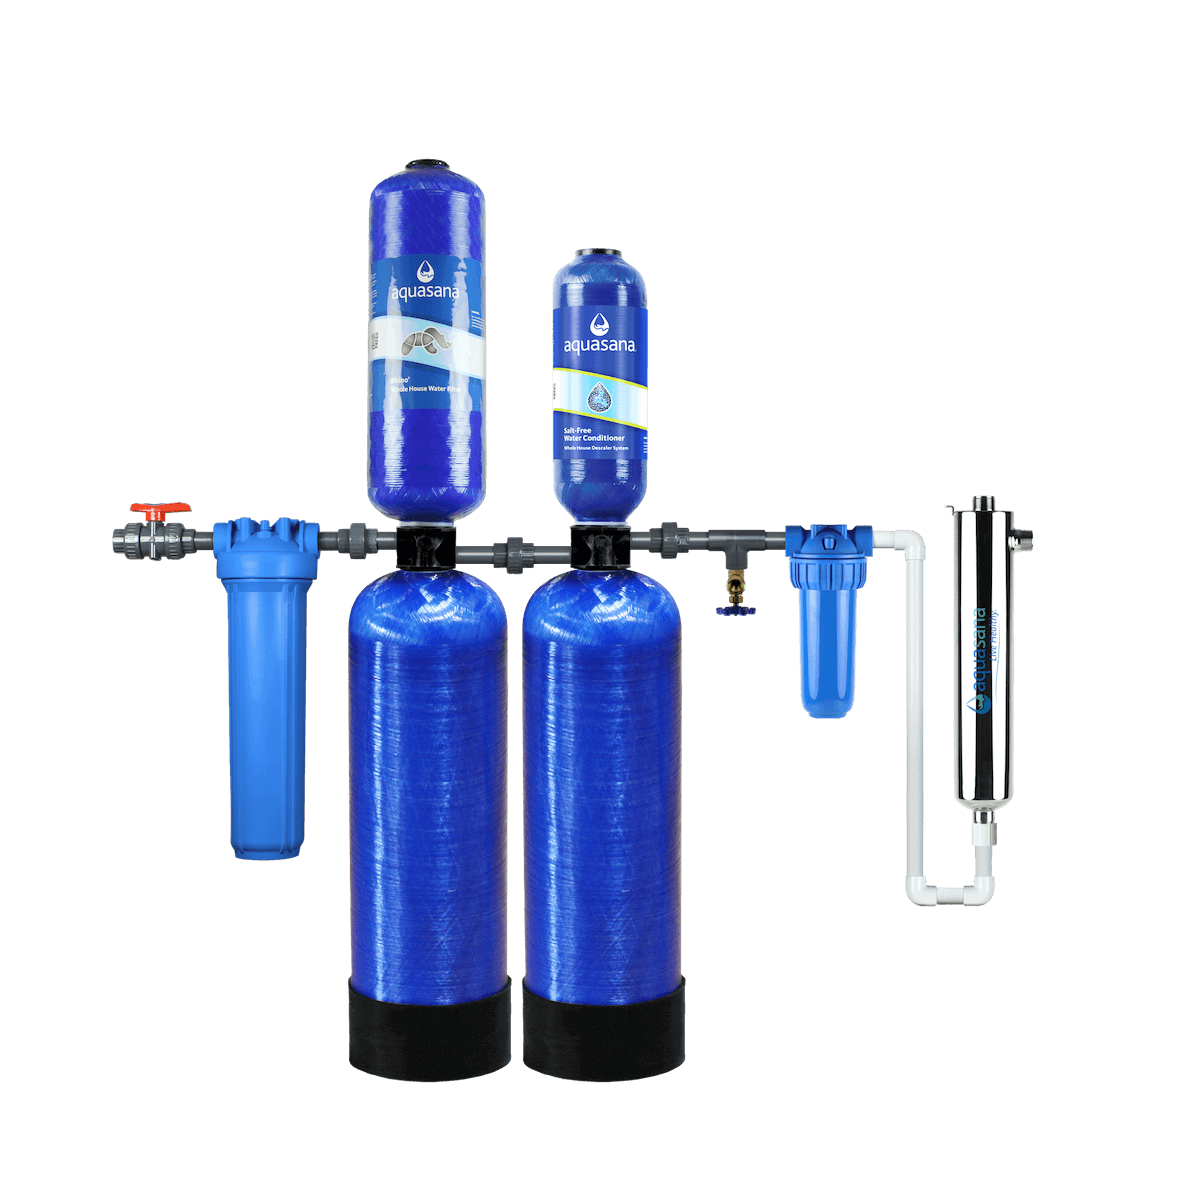 Rhino® Chloramines Max Flow Whole House Water UV Filter System For Home Removes 99% of Bacteria & Viruses Aquasana